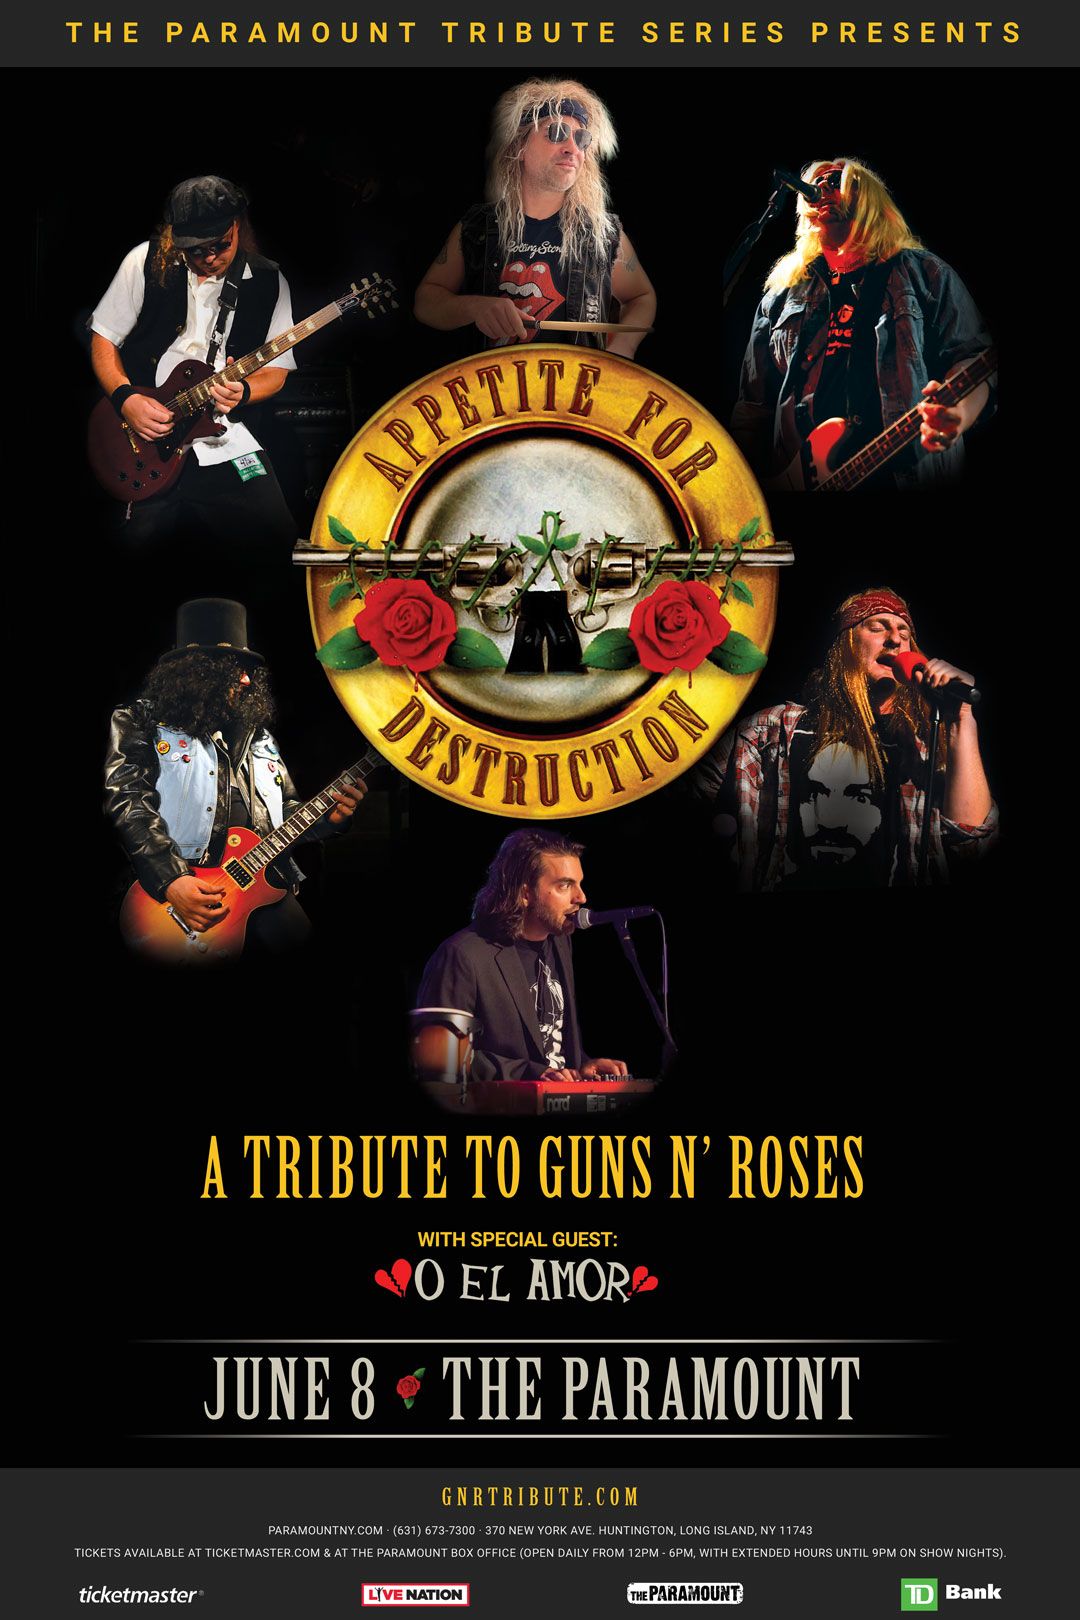 Appetite for Destruction "A Tribute to Guns N' Roses" with Special Guest: O El Amor